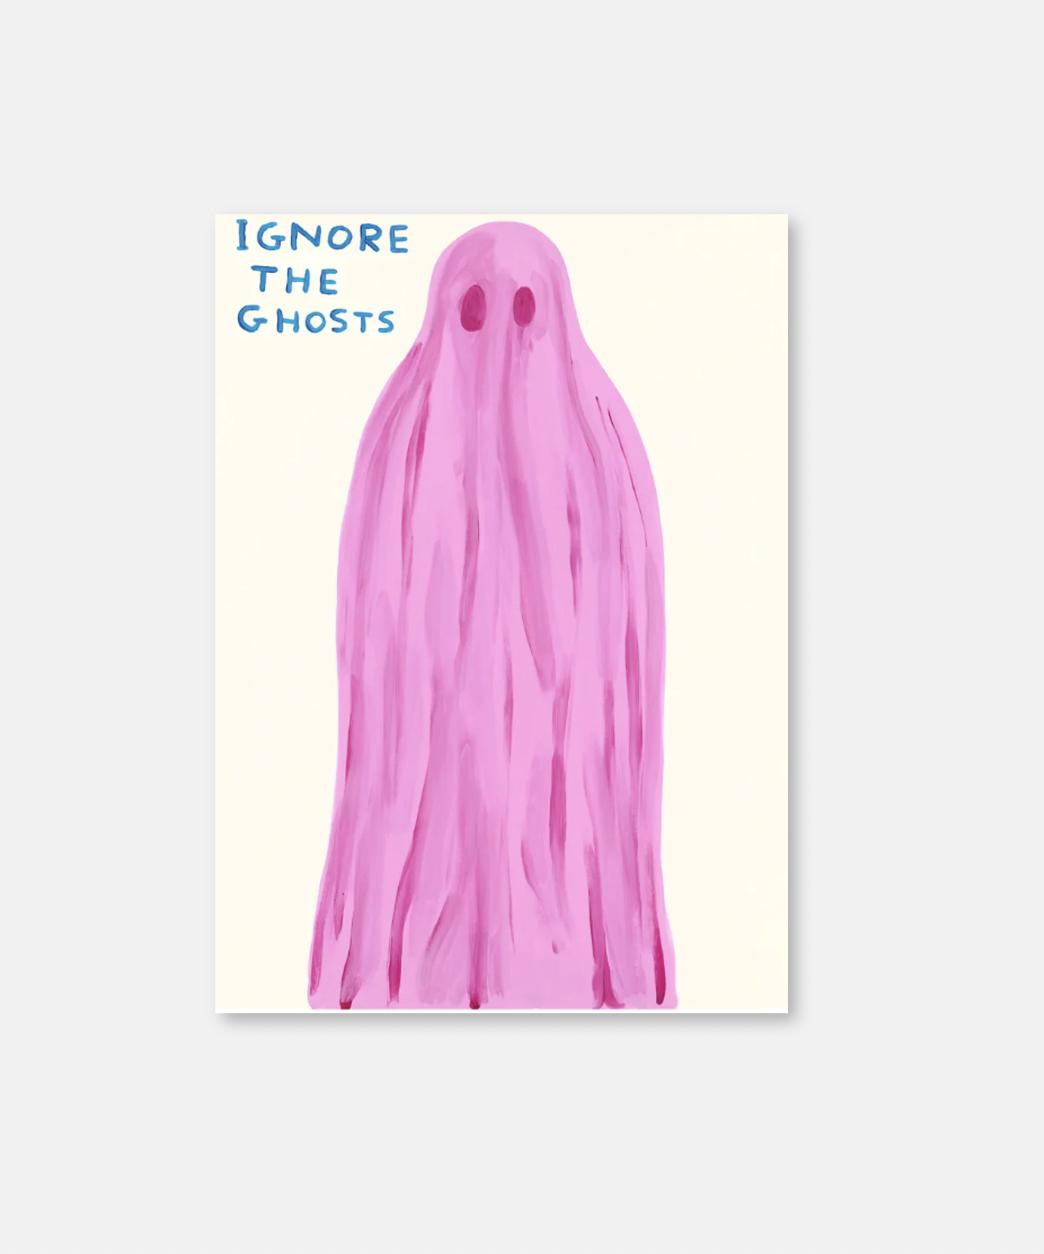 The Wick - Ignore the Ghosts screenprint by David Shrigley